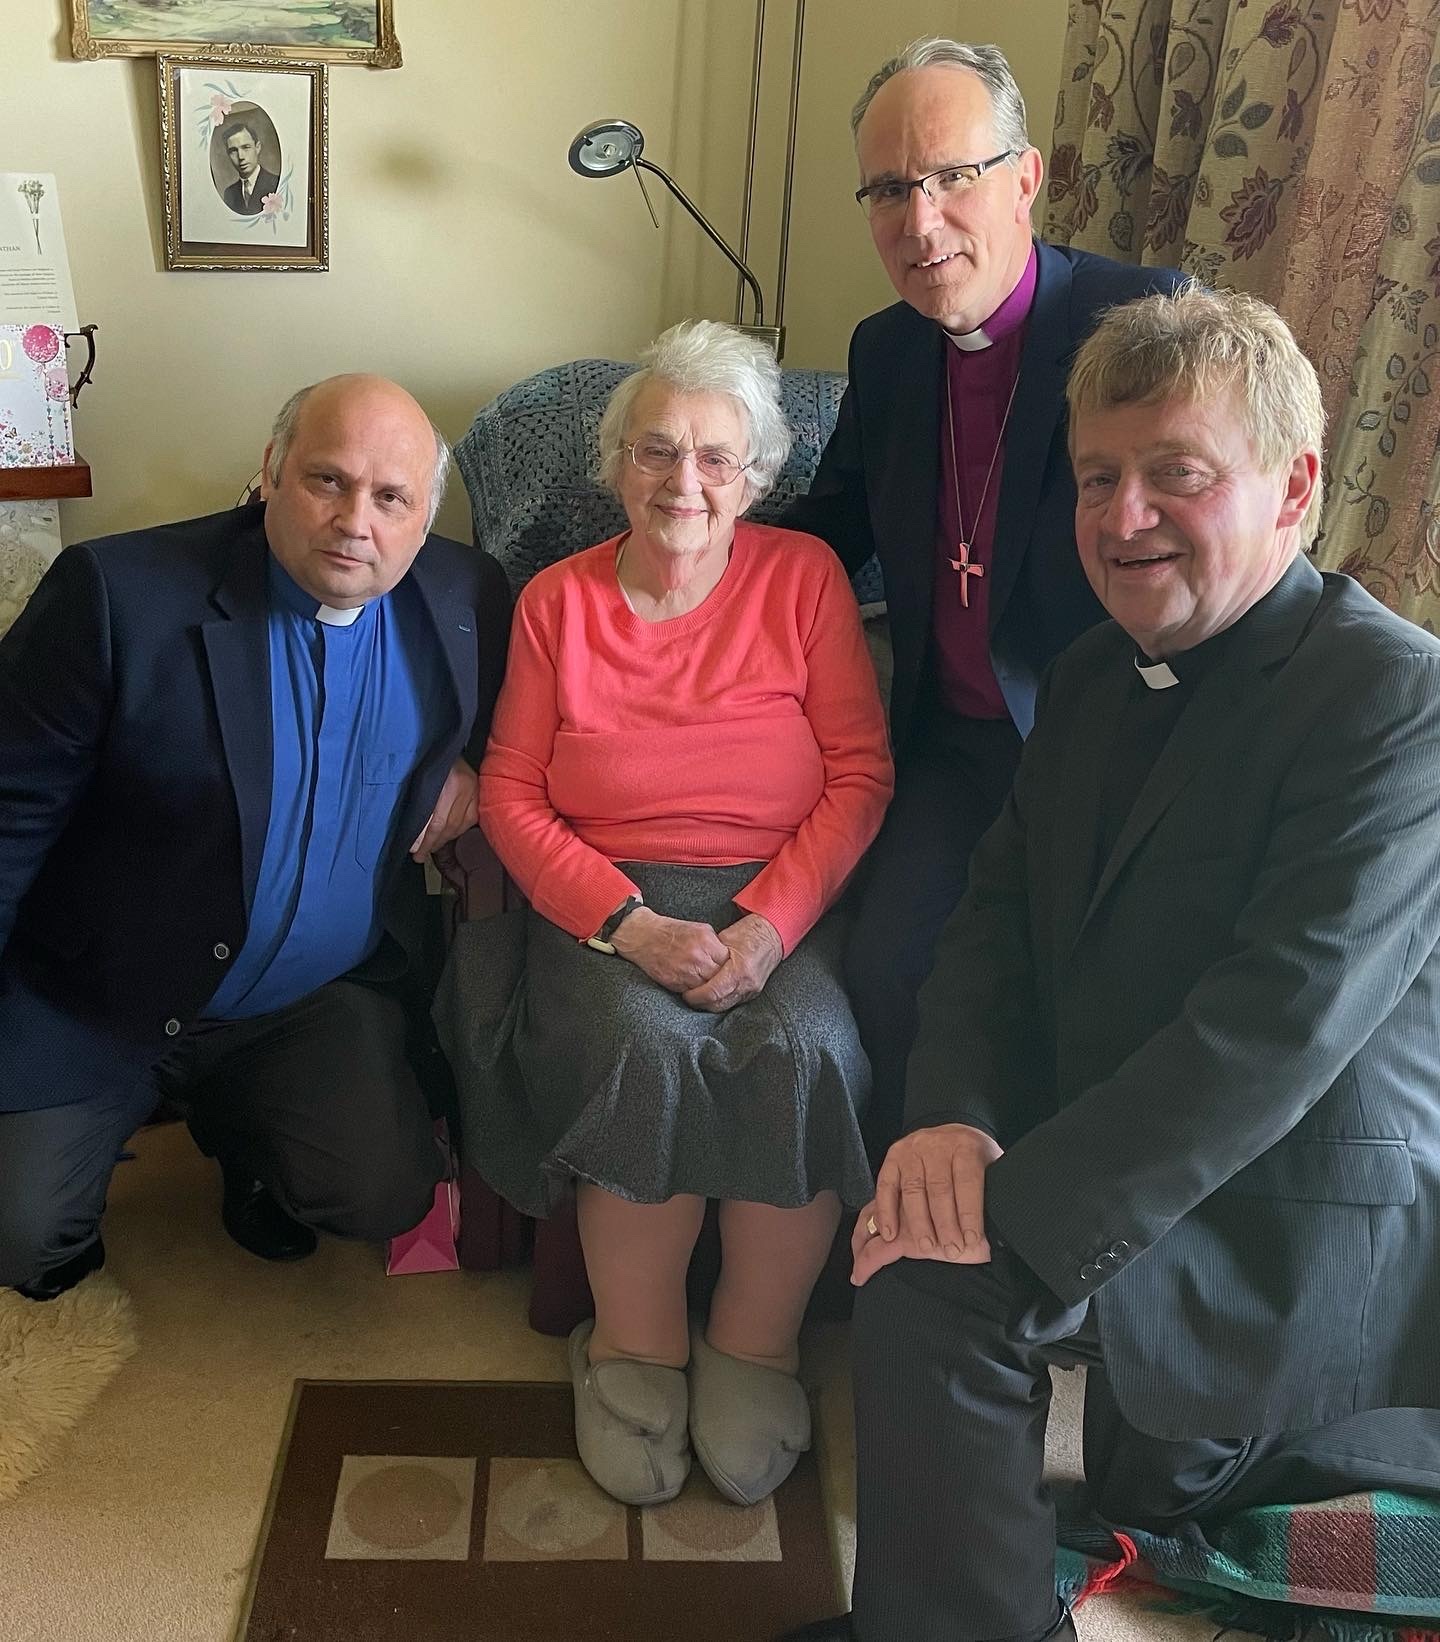 Joining Ethel to celebrate her birthday are; Canon Alan Irwin, Colaghty Parish, Lack, Bishop of Clogher, the Right Revd Dr Ian Ellis and Revd Abraham Storey, who is currently taking services in Mageraculmoney Parish, Ardess, Kesh 